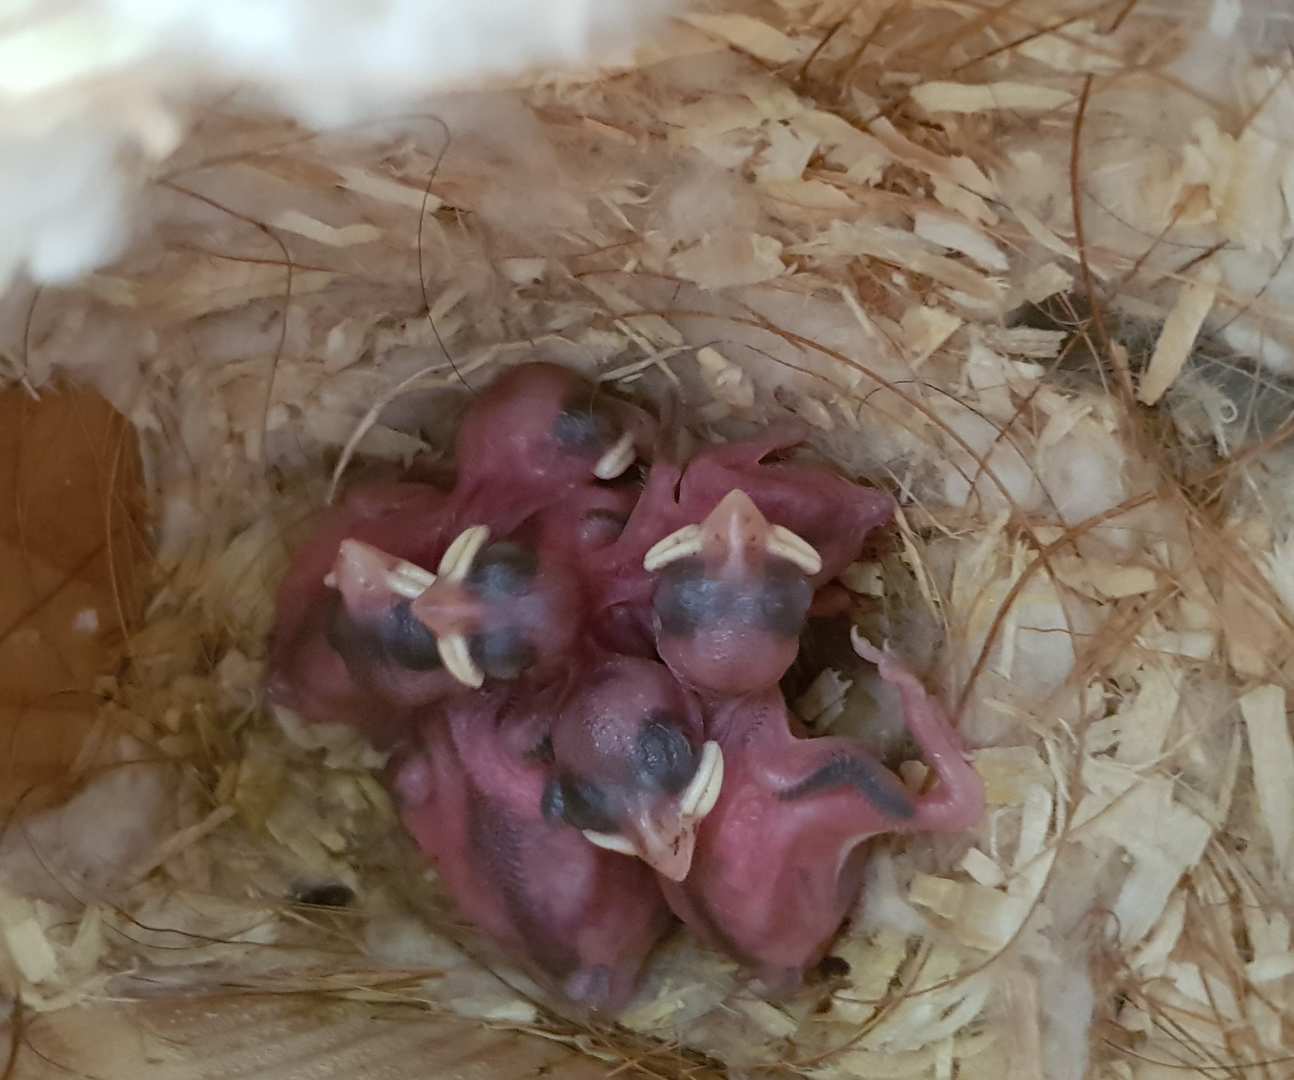 Sparrow chicks in a nest